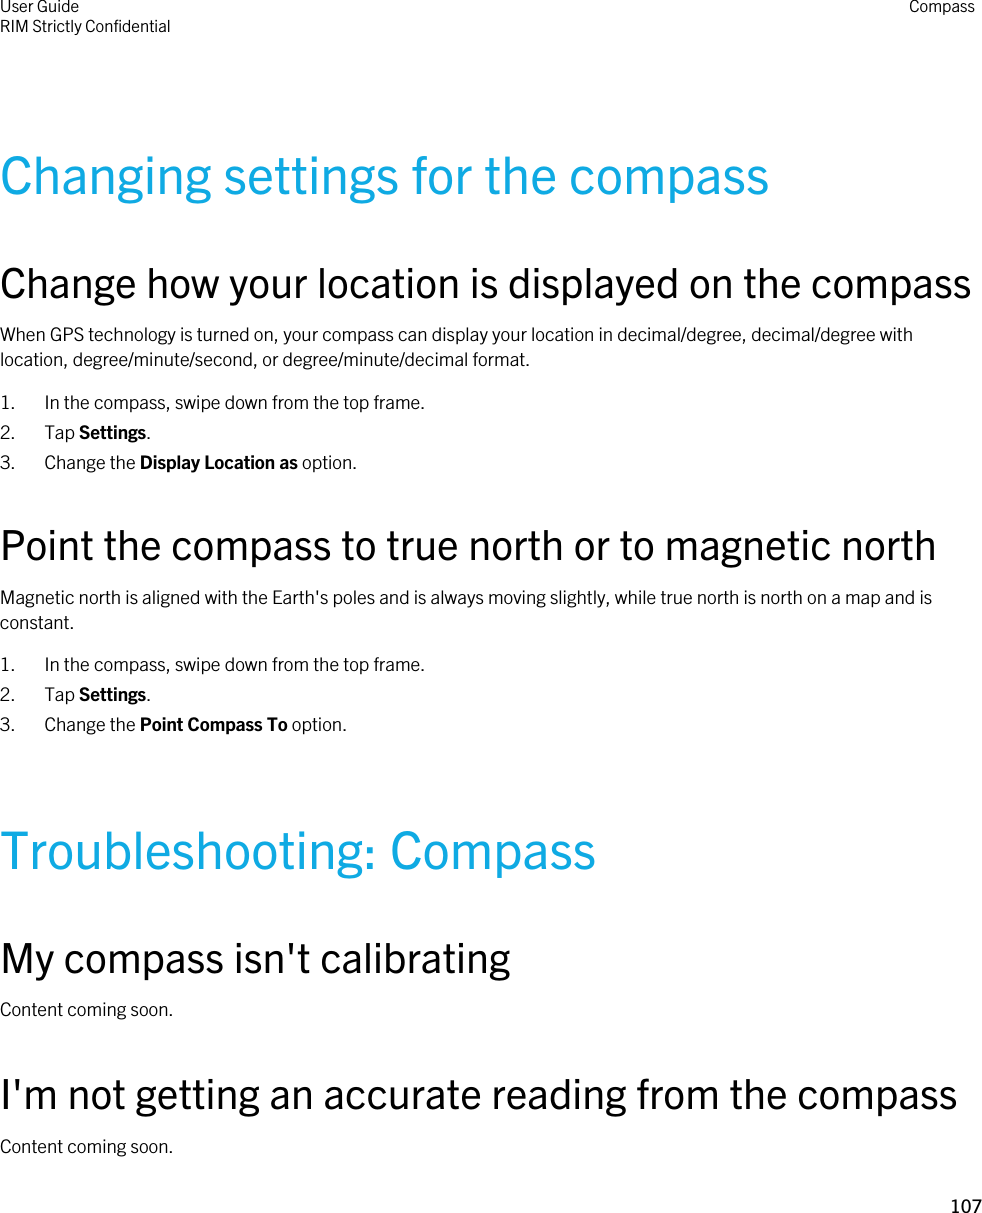 Changing settings for the compassChange how your location is displayed on the compassWhen GPS technology is turned on, your compass can display your location in decimal/degree, decimal/degree with location, degree/minute/second, or degree/minute/decimal format.1. In the compass, swipe down from the top frame.2. Tap Settings.3. Change the Display Location as option.Point the compass to true north or to magnetic northMagnetic north is aligned with the Earth&apos;s poles and is always moving slightly, while true north is north on a map and is constant.1. In the compass, swipe down from the top frame.2. Tap Settings.3. Change the Point Compass To option.Troubleshooting: CompassMy compass isn&apos;t calibratingContent coming soon.I&apos;m not getting an accurate reading from the compassContent coming soon.User GuideRIM Strictly ConfidentialCompass107 